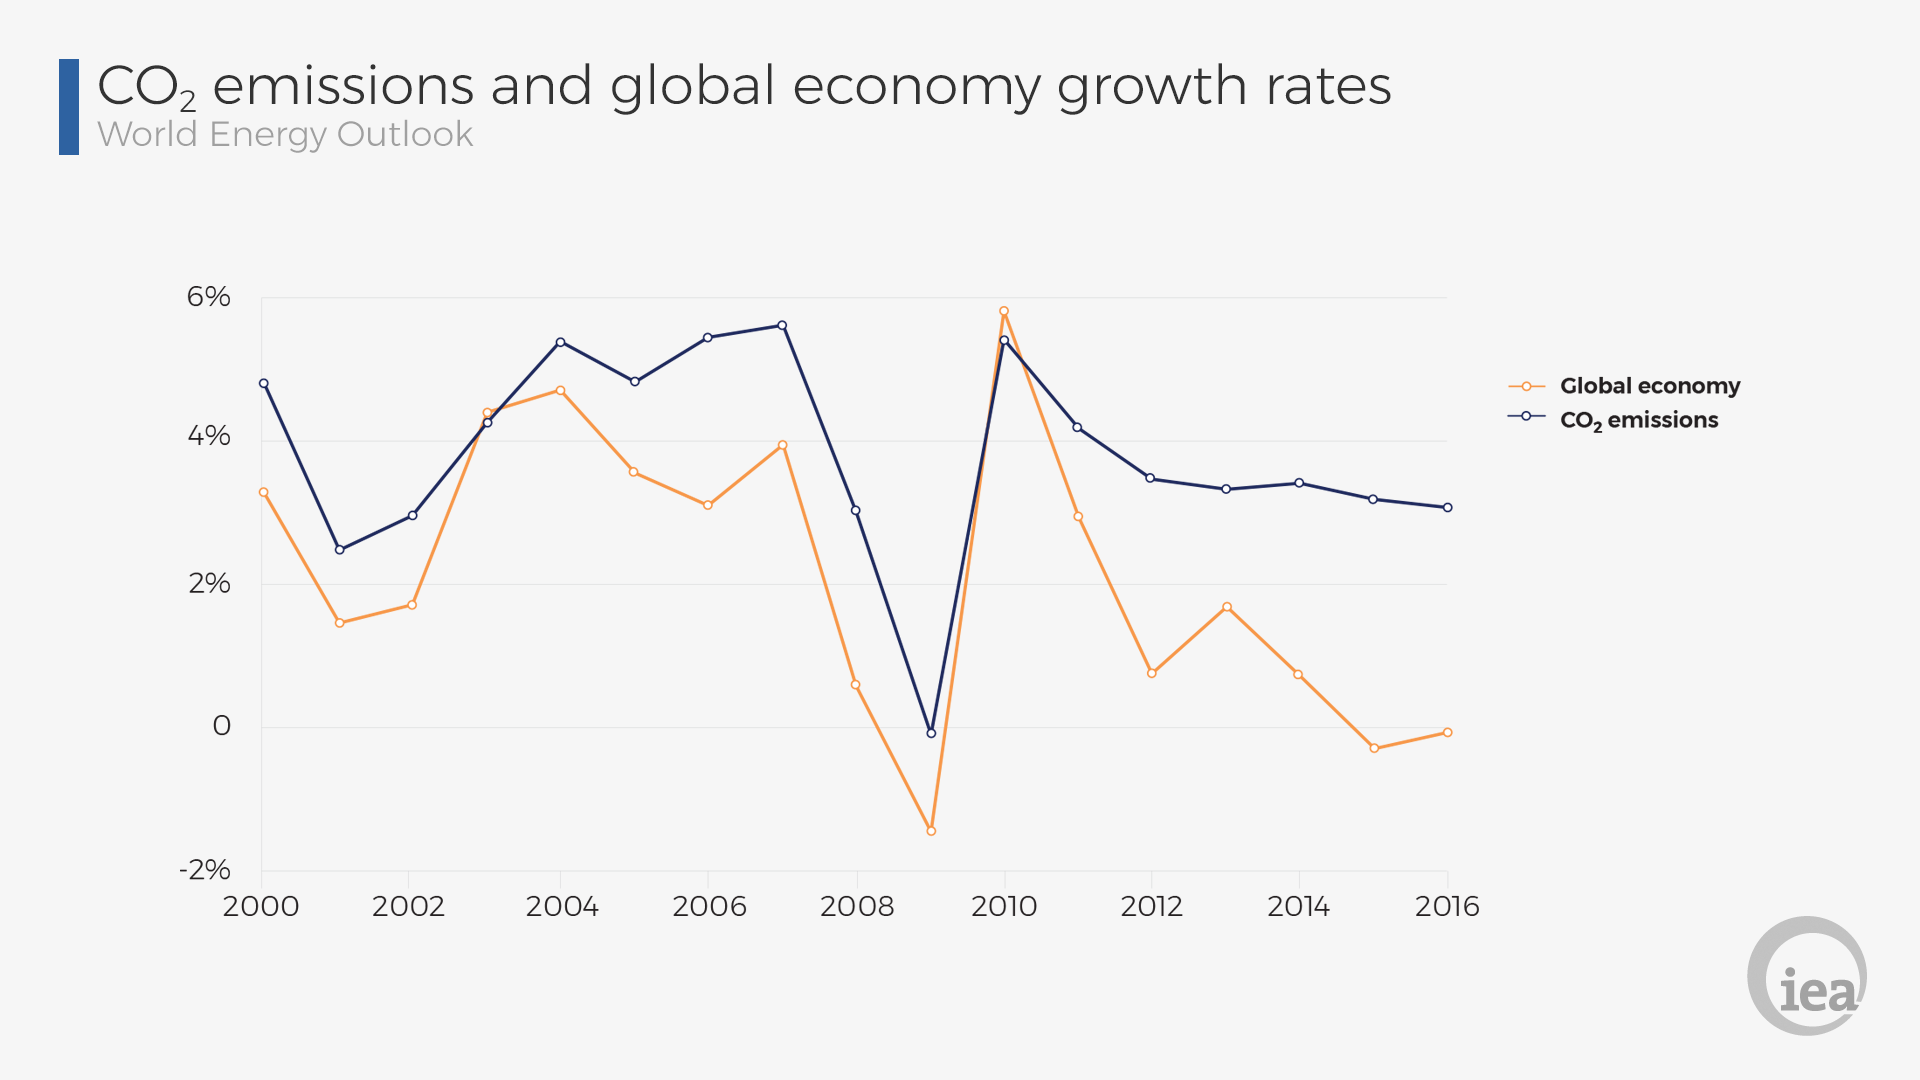 Economic growth and carbon emissions are closely linked.